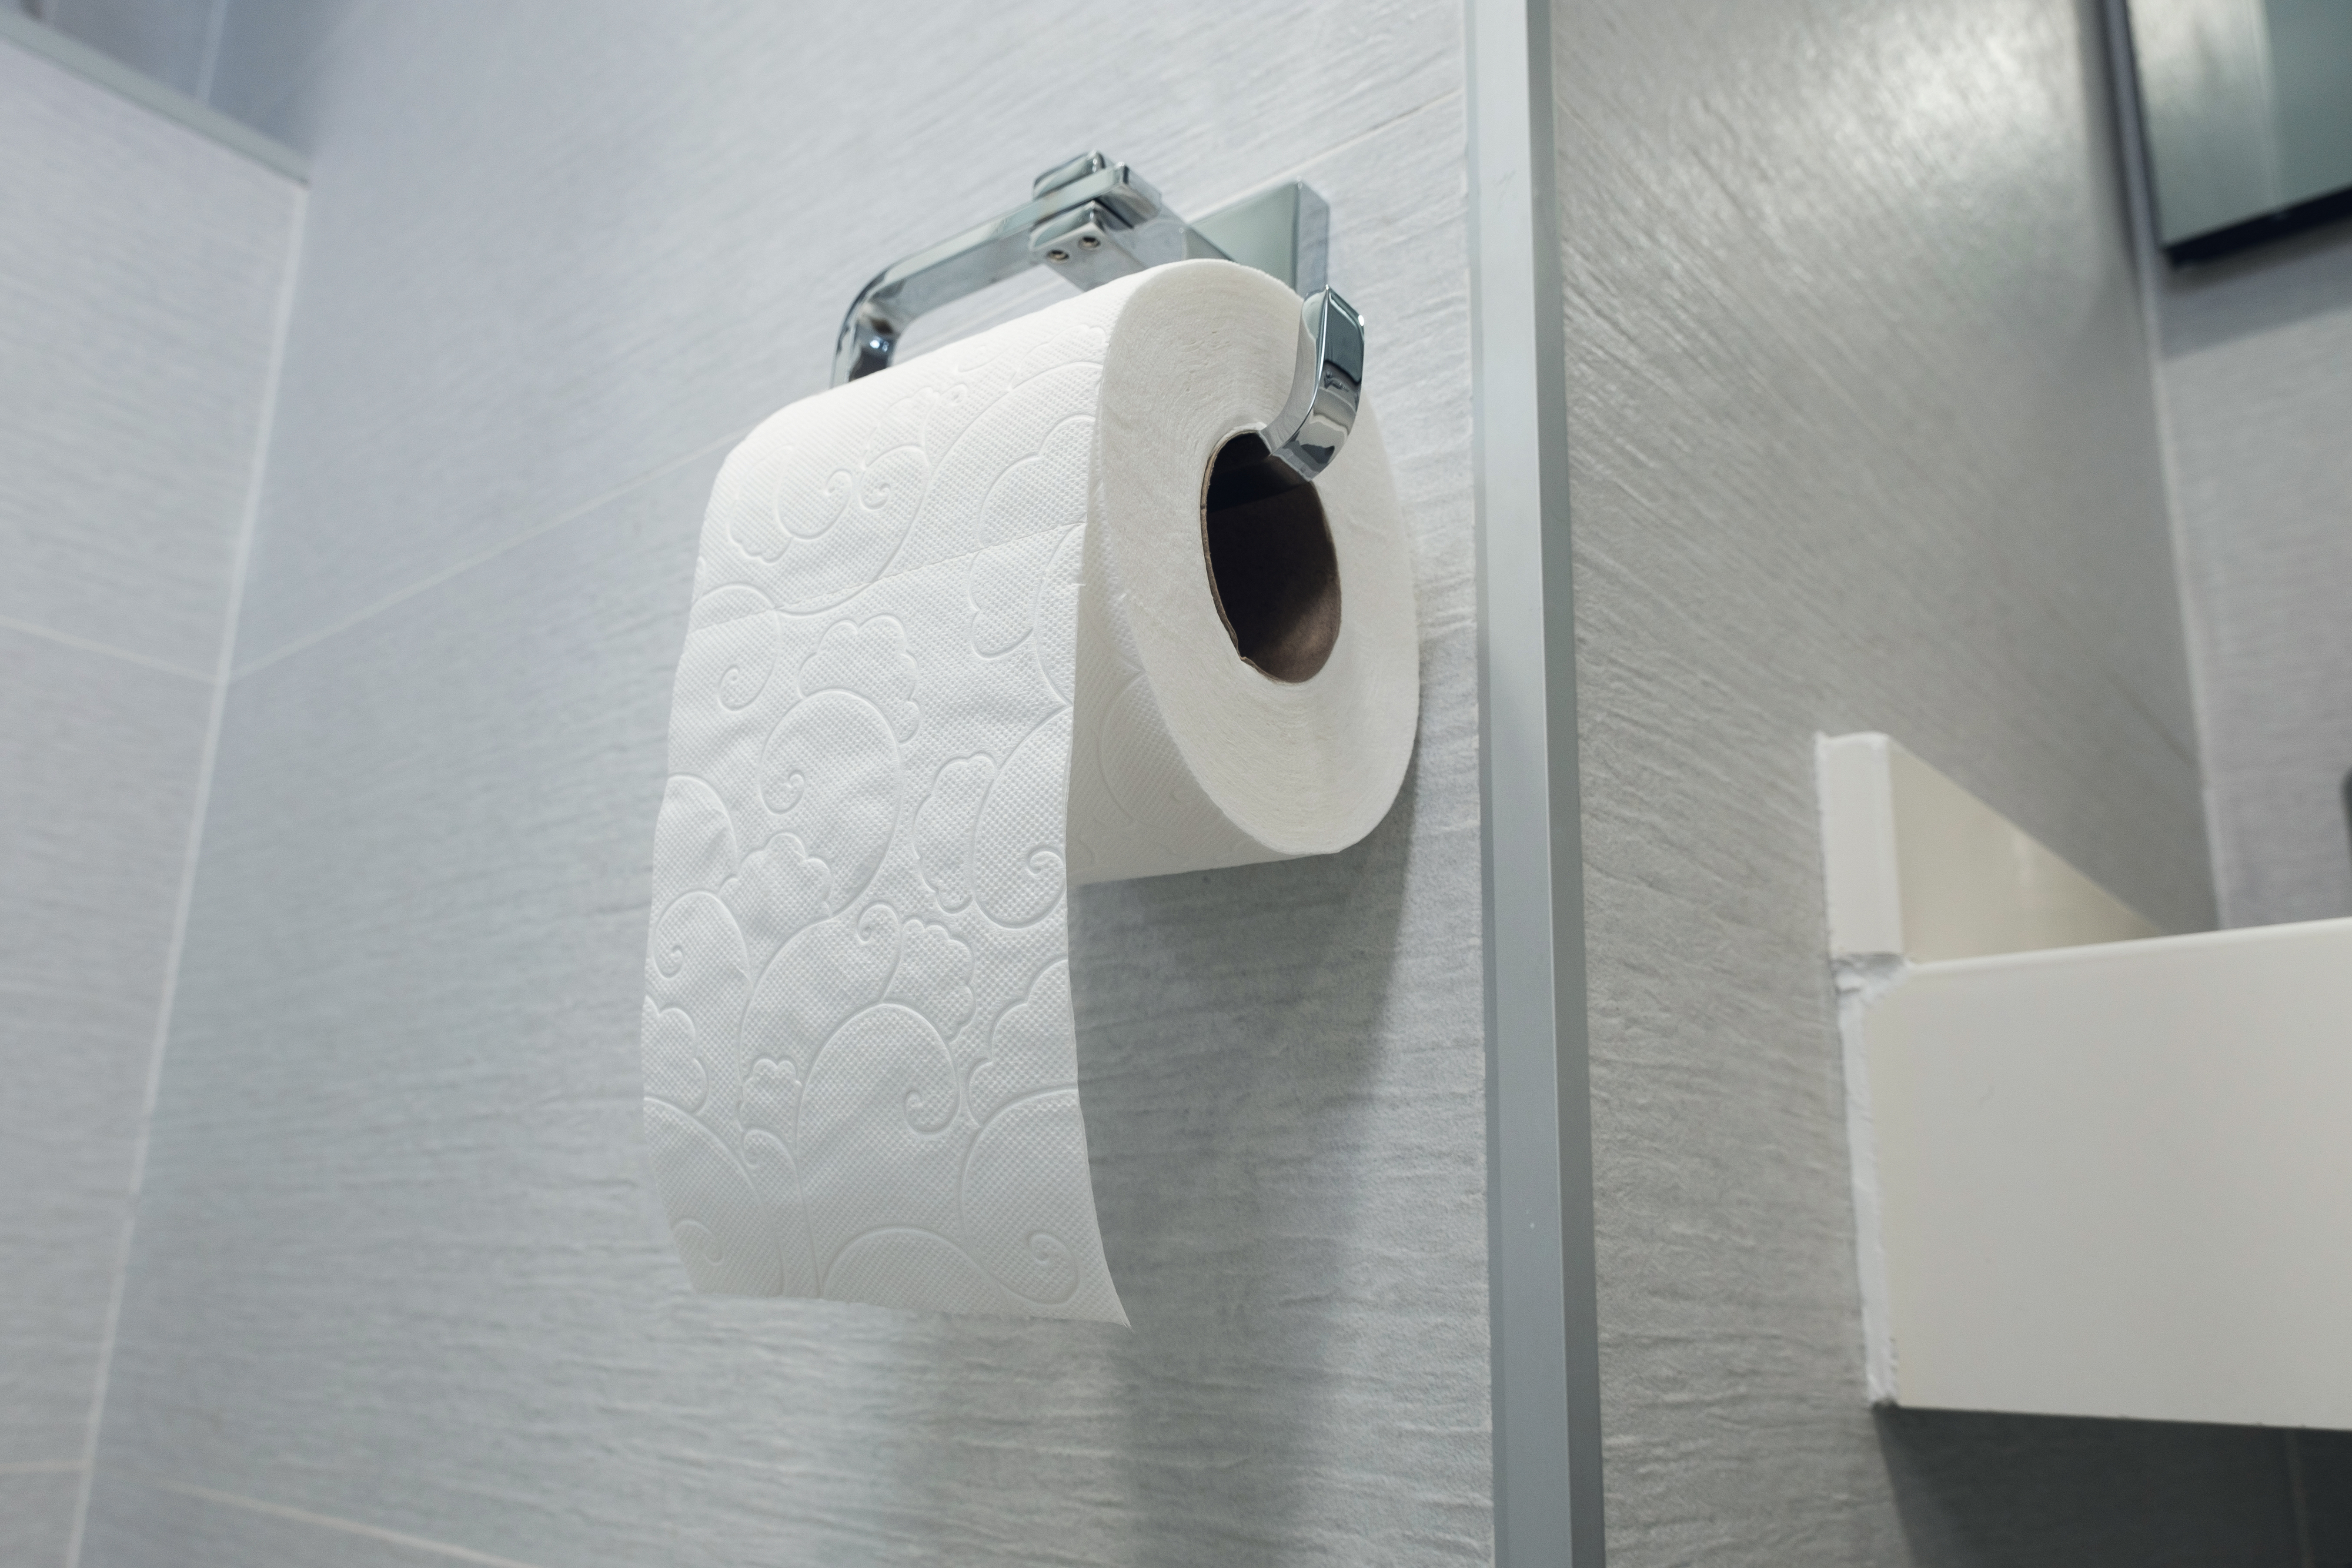 A roll of toilet paper hanging on a holder against a tiled bathroom wall